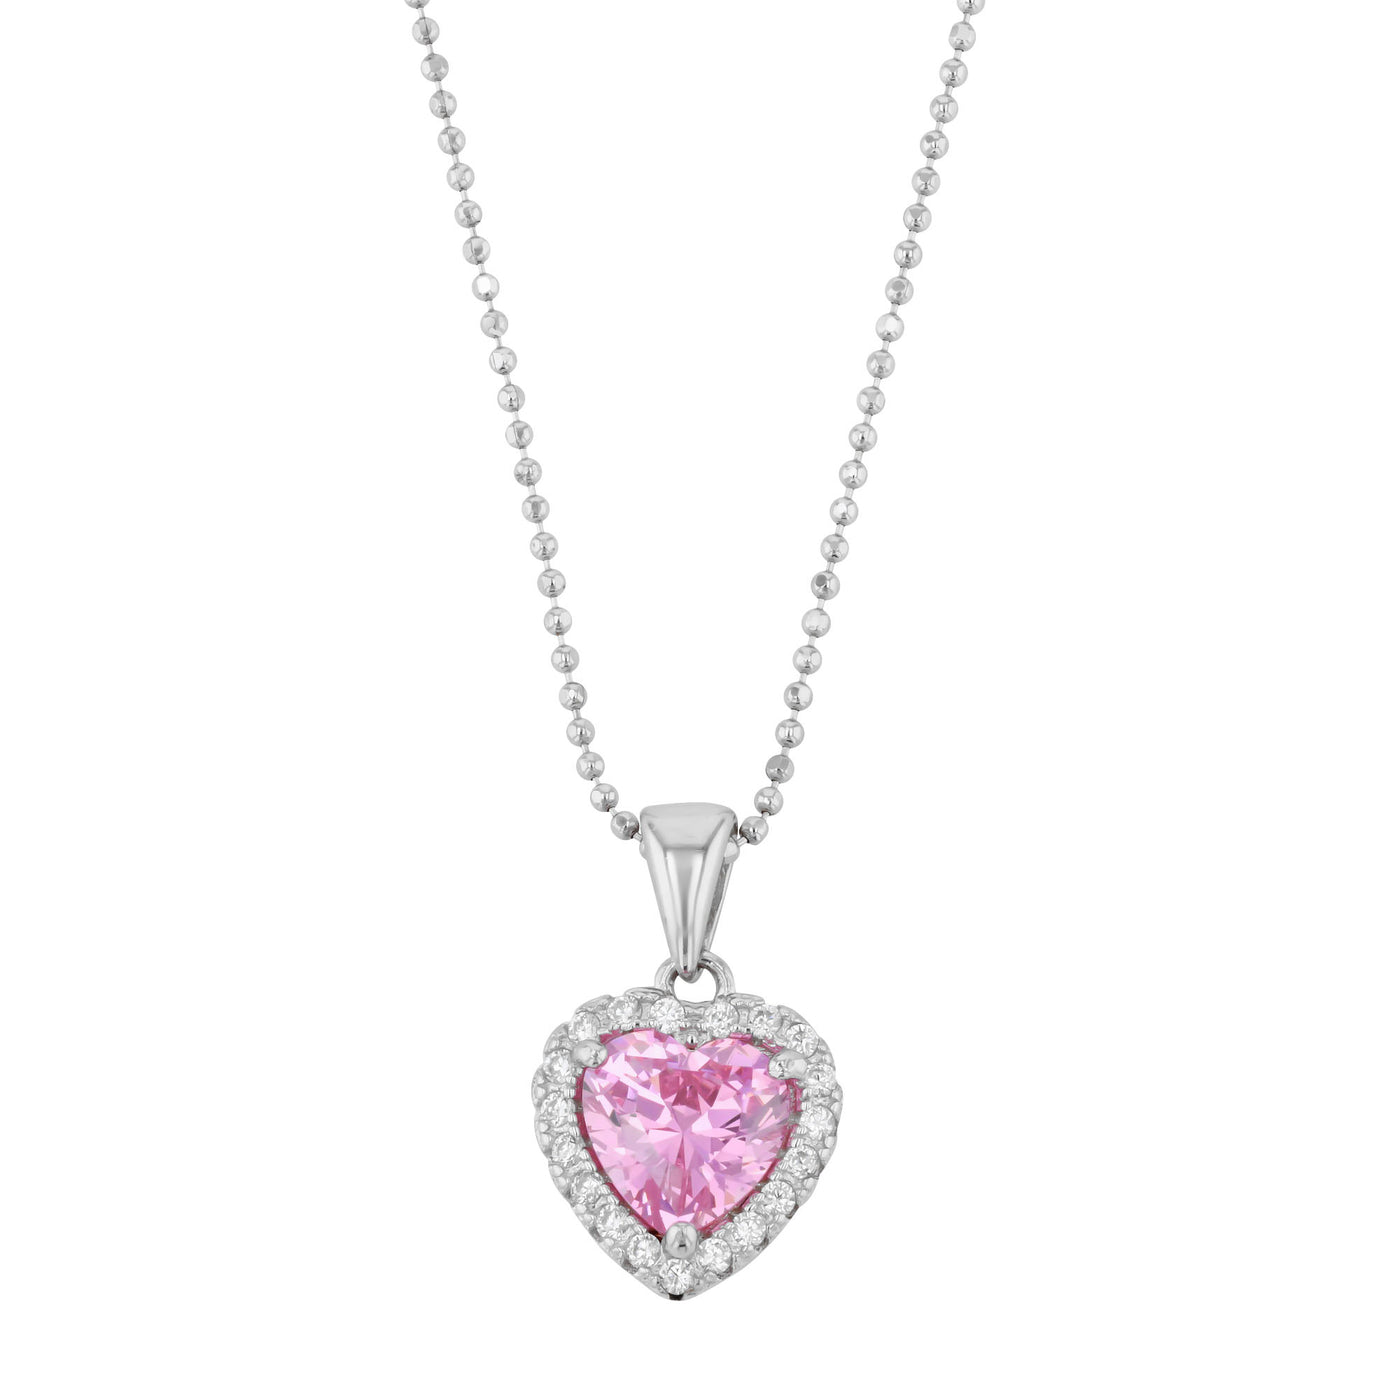 Rebecca Sloane Silver Heart With CZ And Faceted Pink CZ Pendant